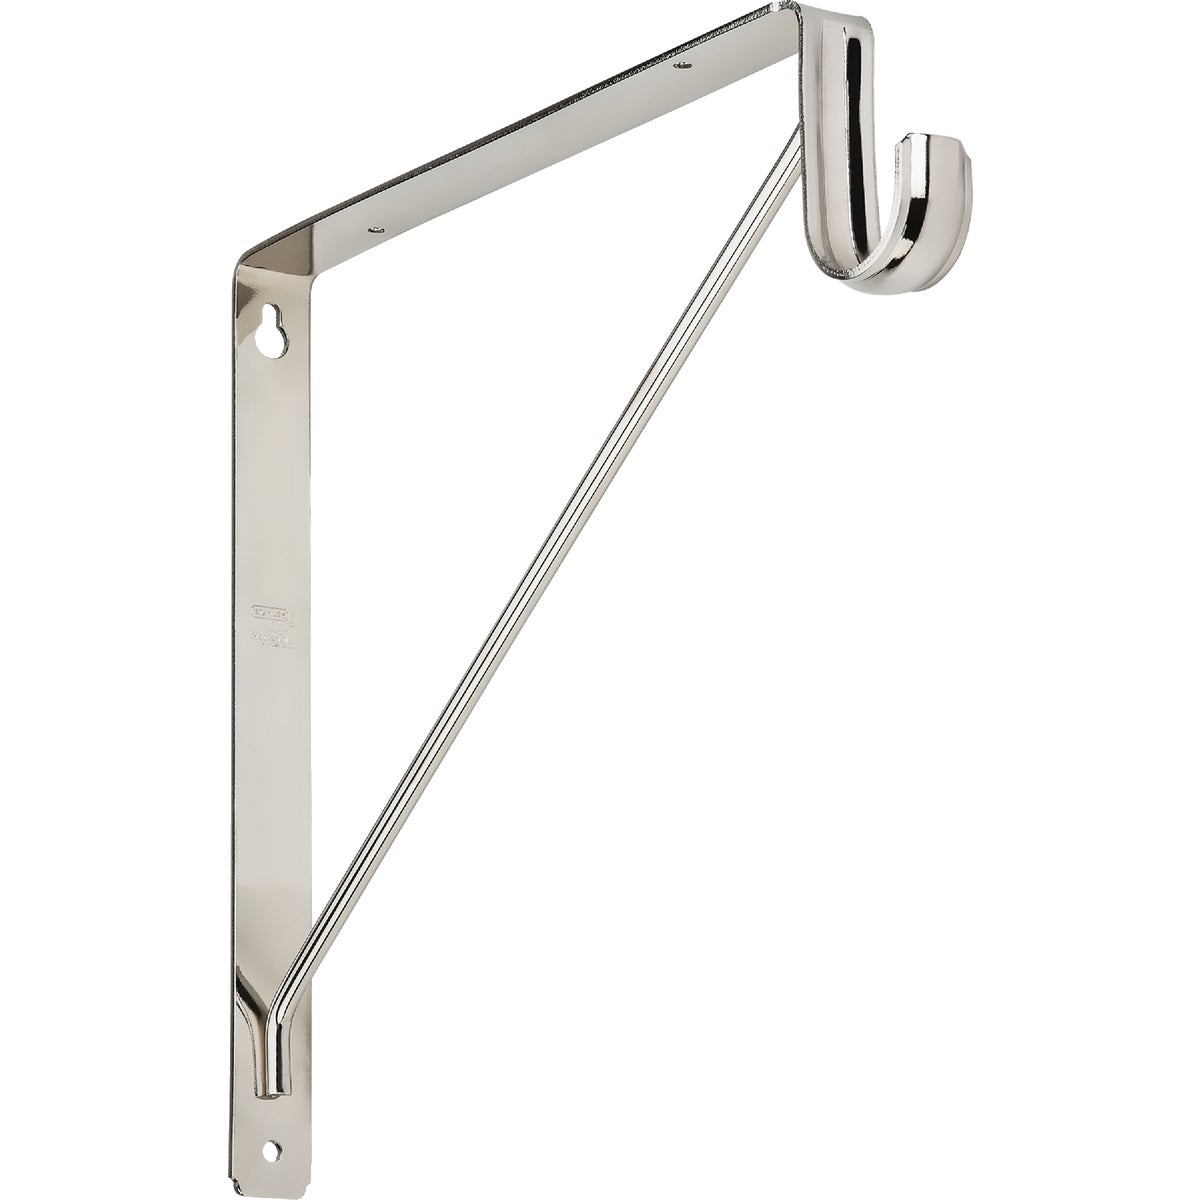 Item 257281, Shelf and rod bracket is designed for mounting shelves and closet rods in 